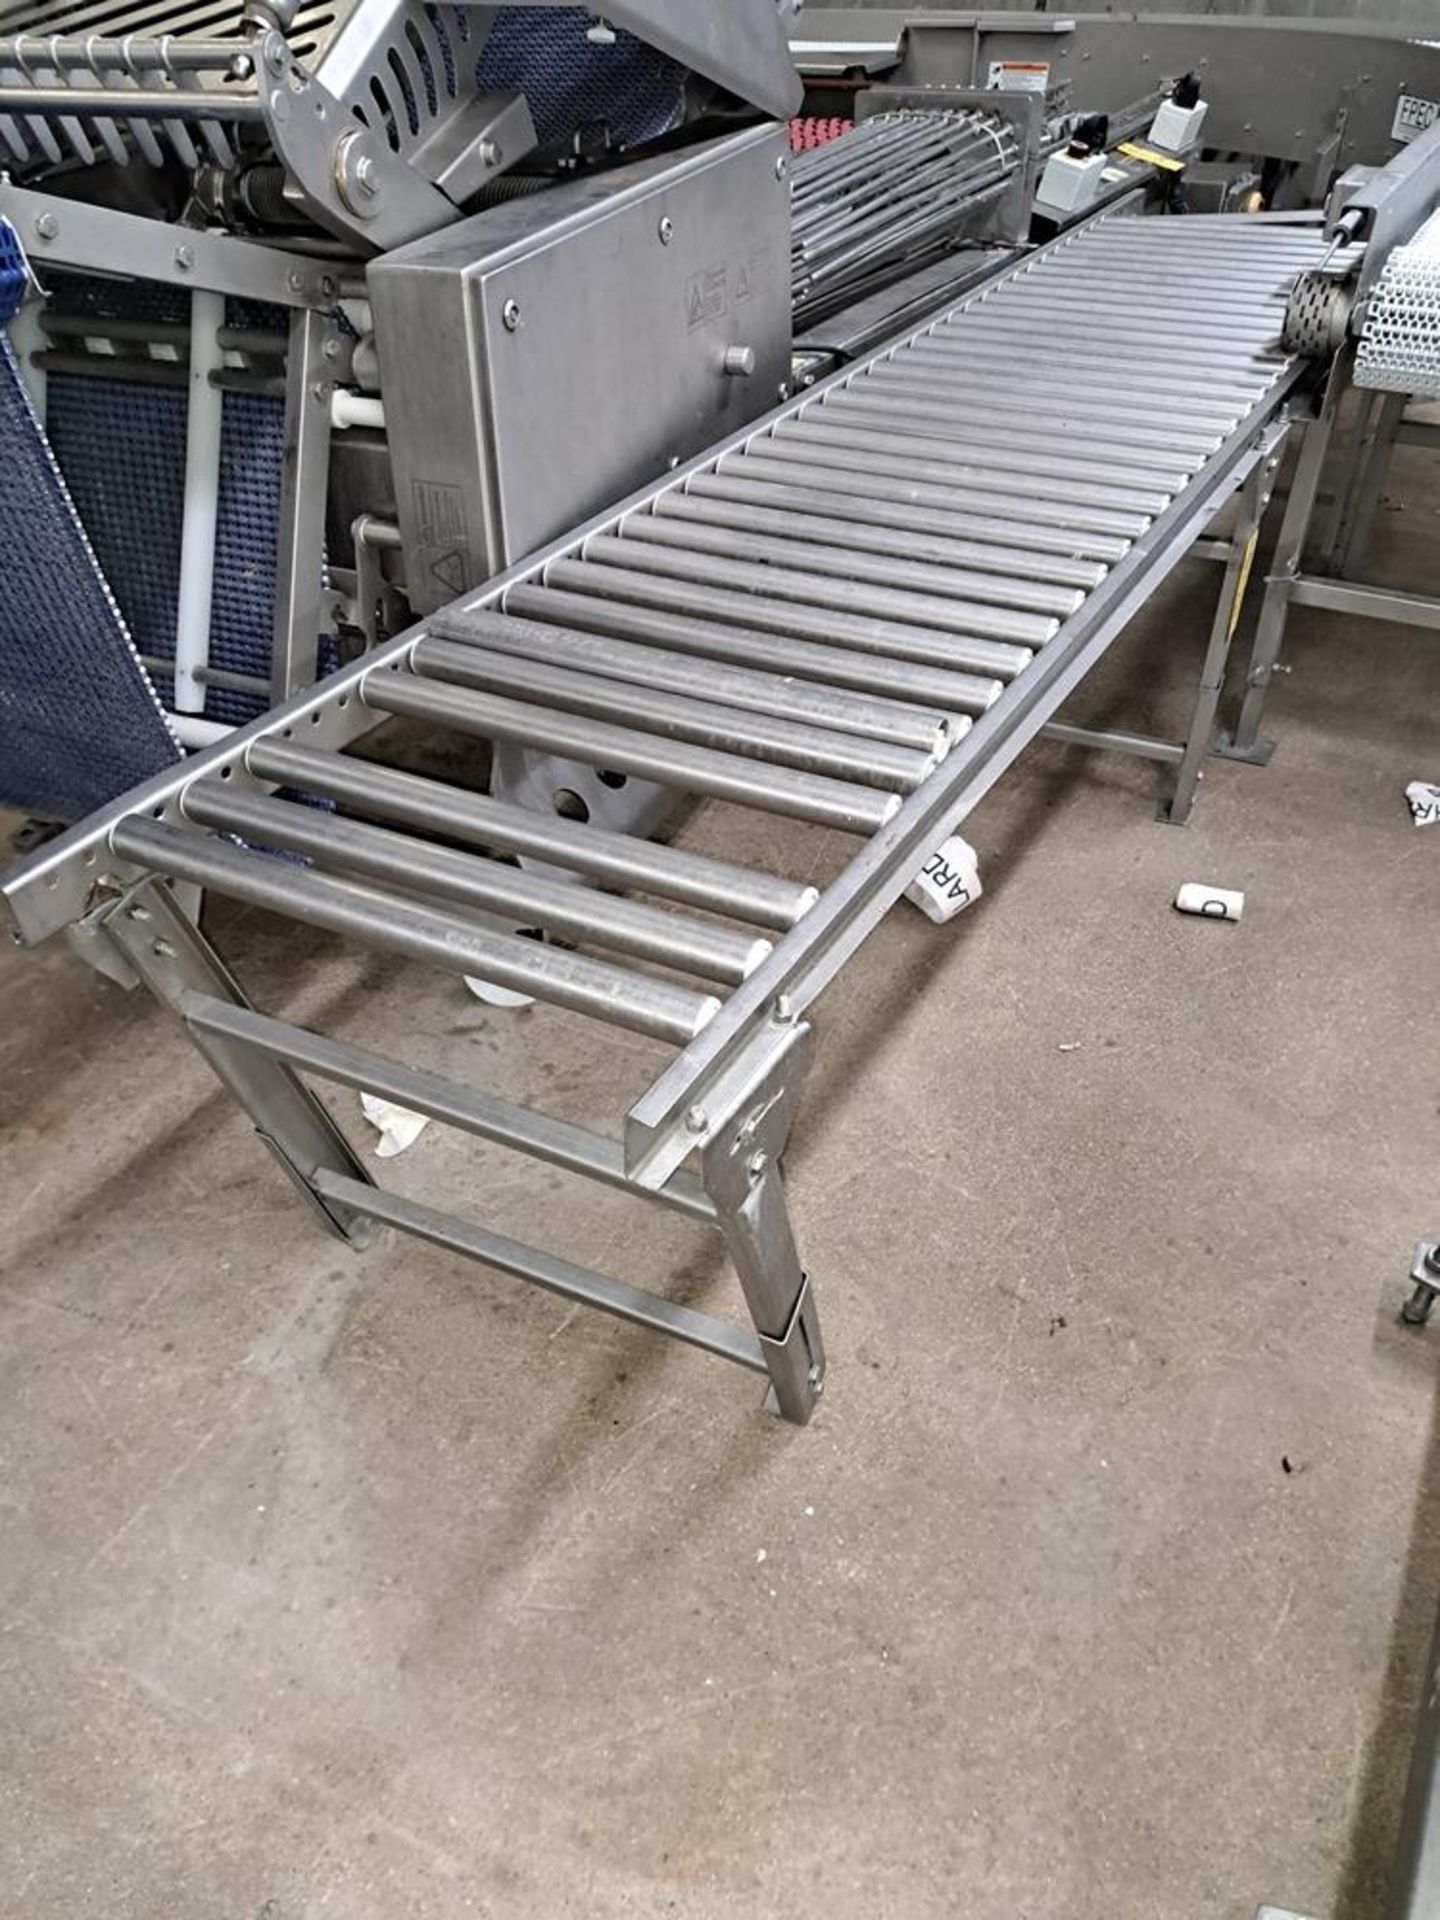 Lot Roller Conveyor, Stainless Steel Processing Bins with chutes, Stainless Steel Platform,